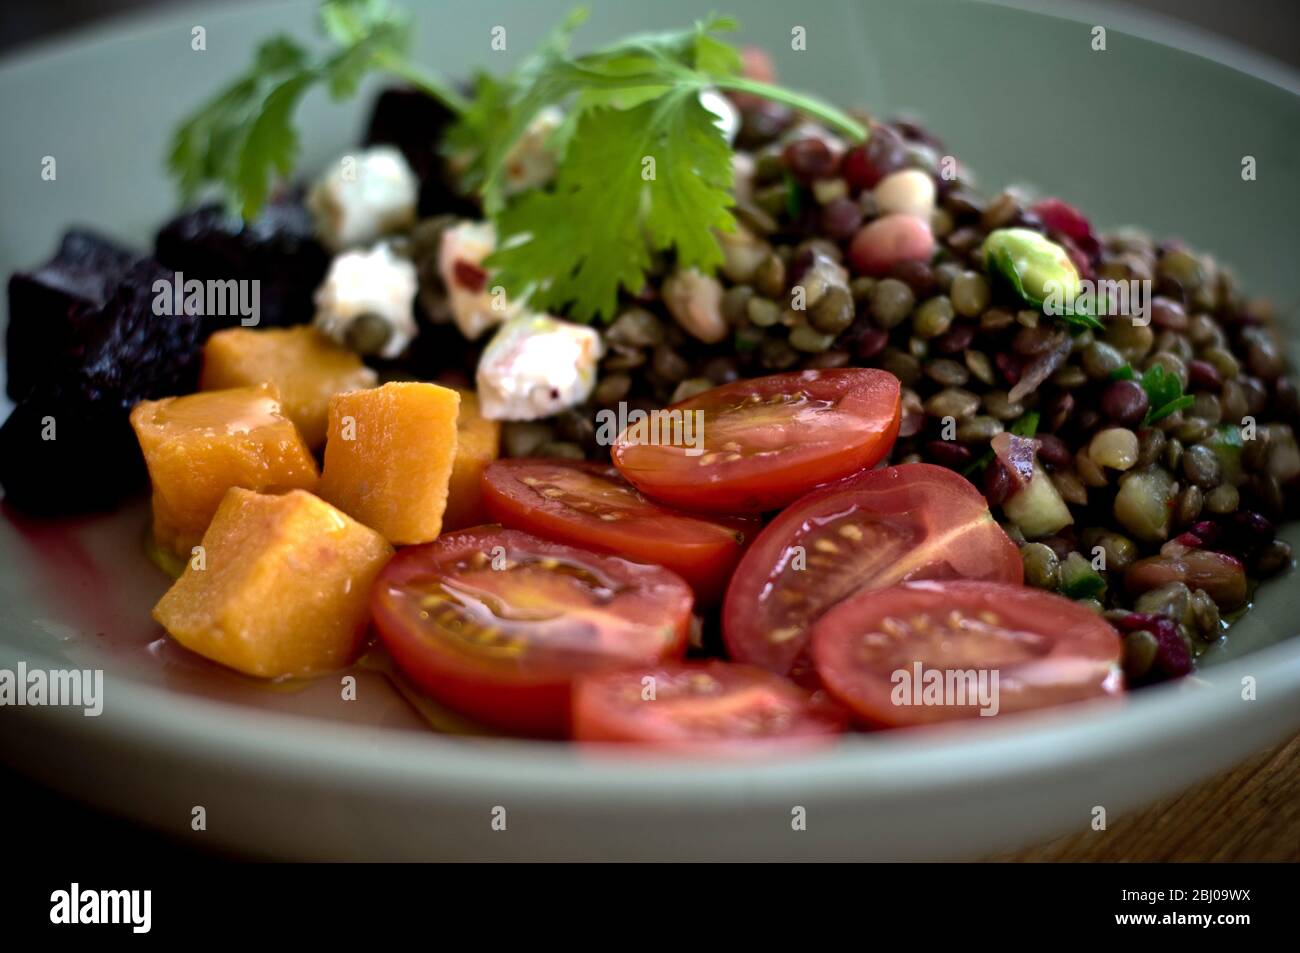 Vegetarian salad of lentils with herbs and edamame beans, small plum tomatoes, pickled beetroot, pumpkin chunks and goat's cheese. Stock Photo